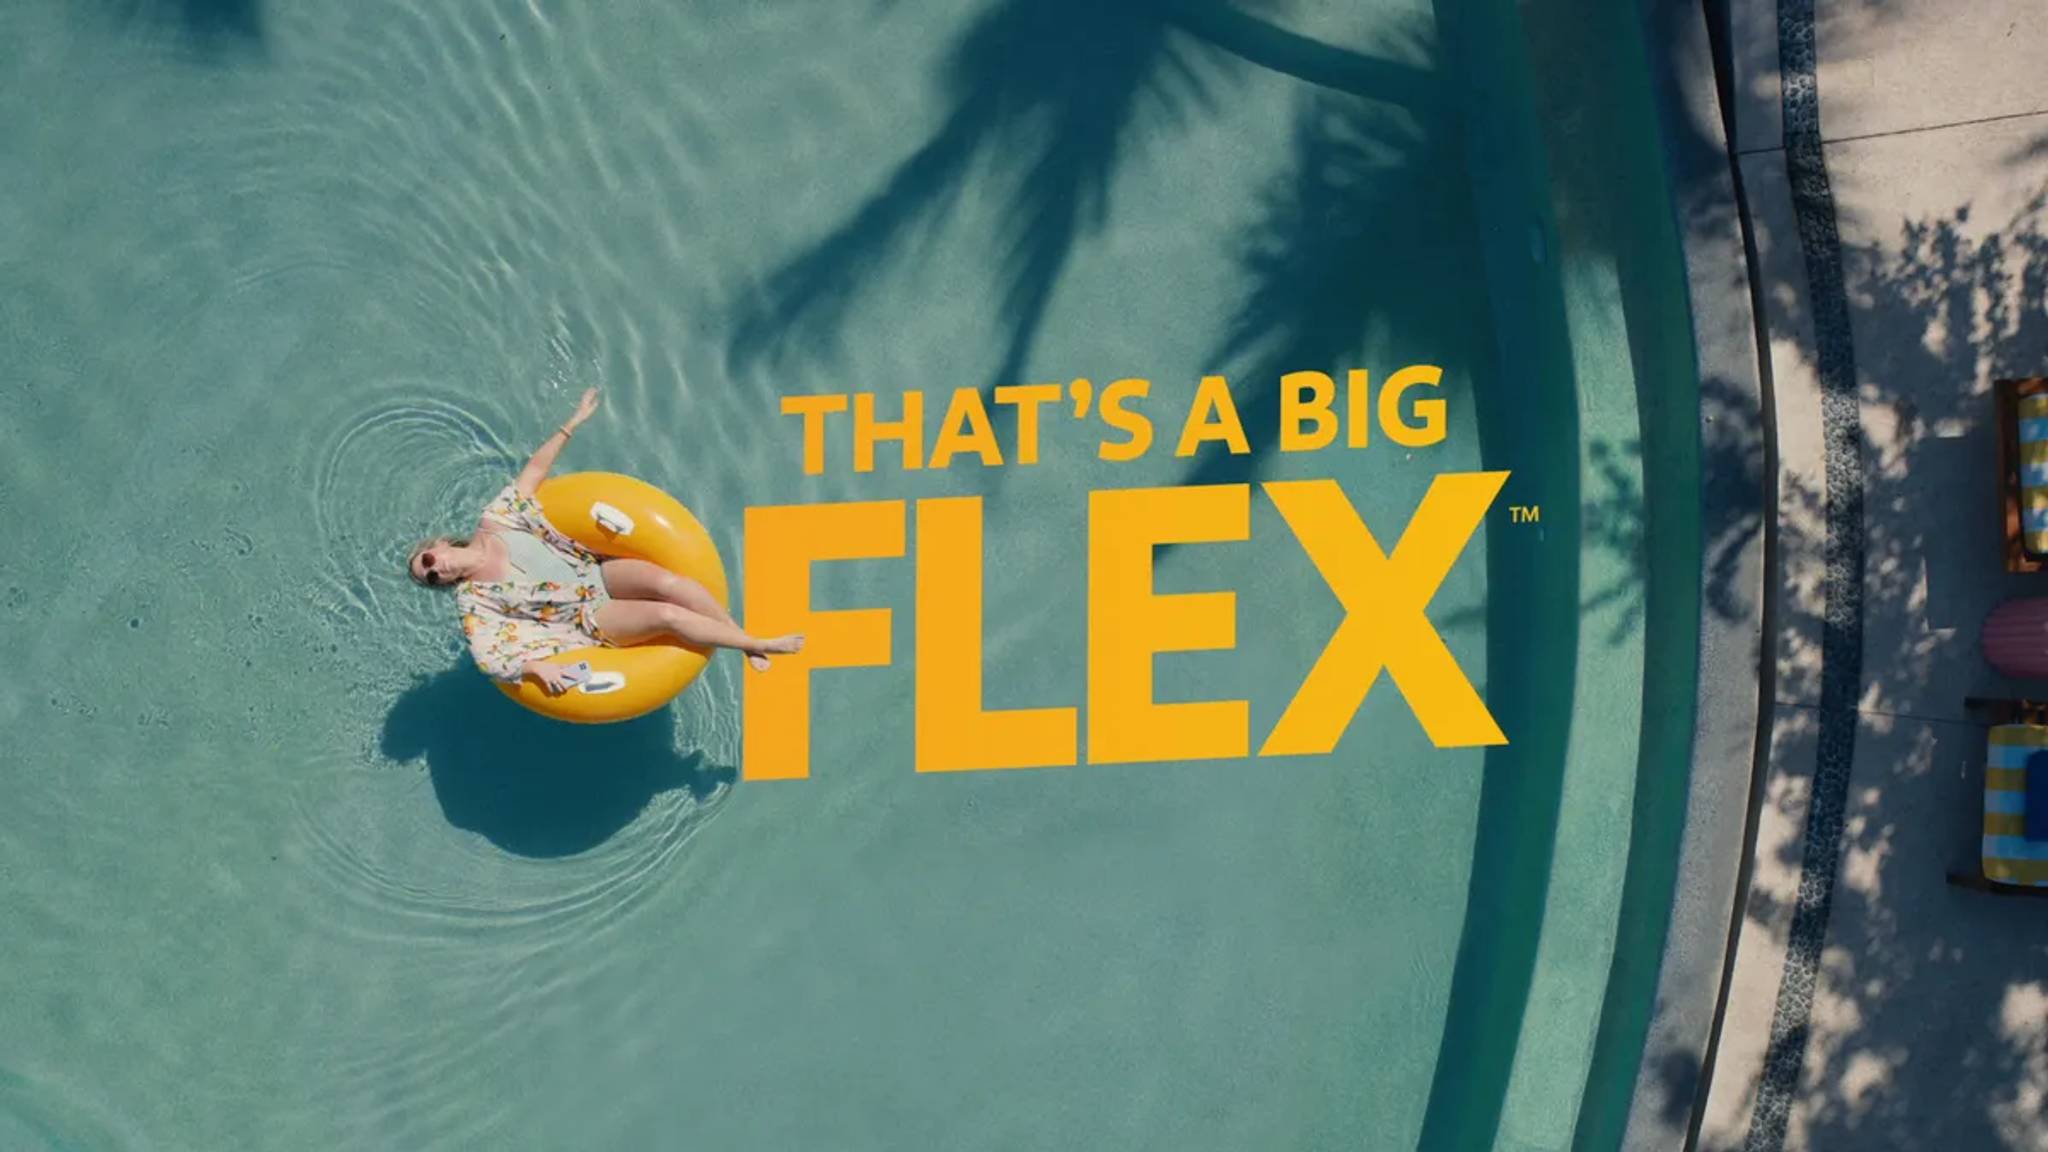 Southwest Airlines campaign 'flexes' on budget airlines